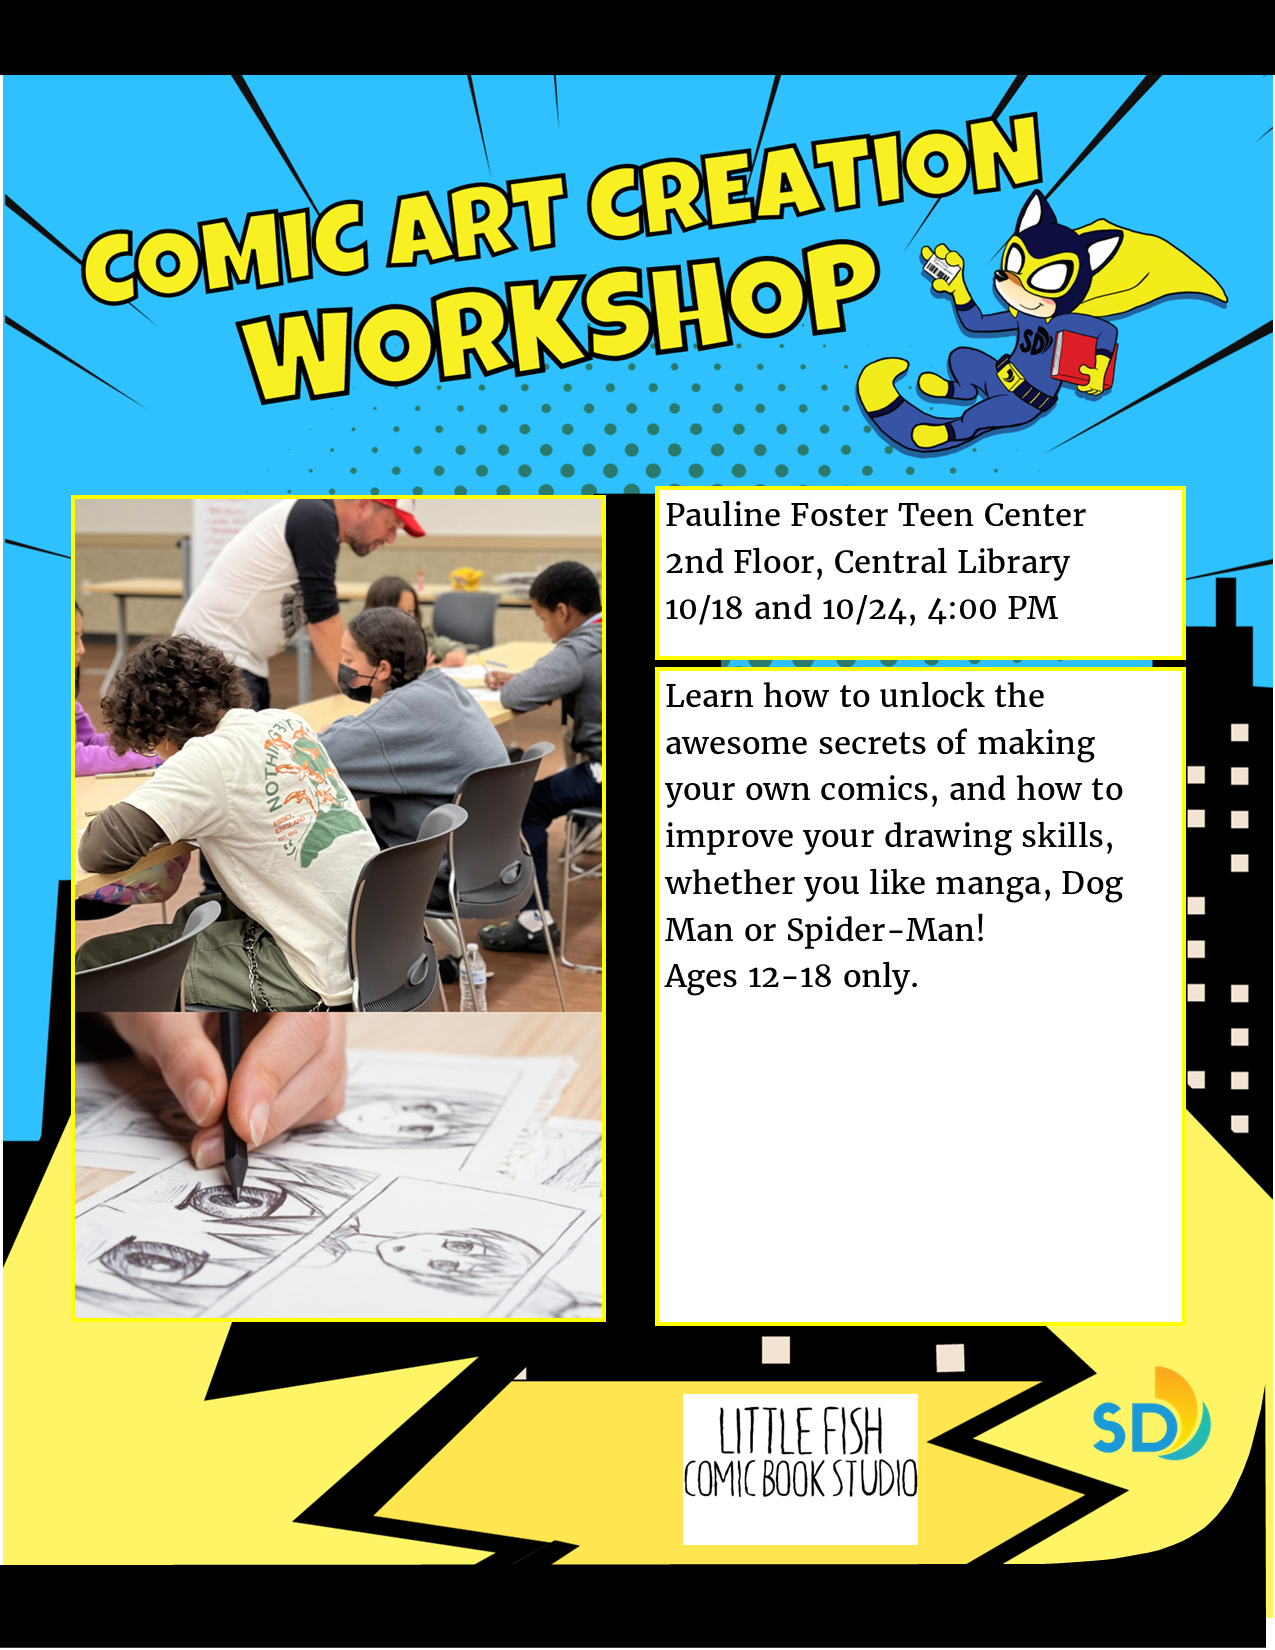 Pauline Foster Teen Center 2nd Floor, Central Library 10/18 and 10/24, 4:00 PM  Ages 12-18 only. Learn how to unlock the awesome secrets of making  your own comics, and how to improve your drawing skills, whether you like manga, Dog Man or Spider-Man!  